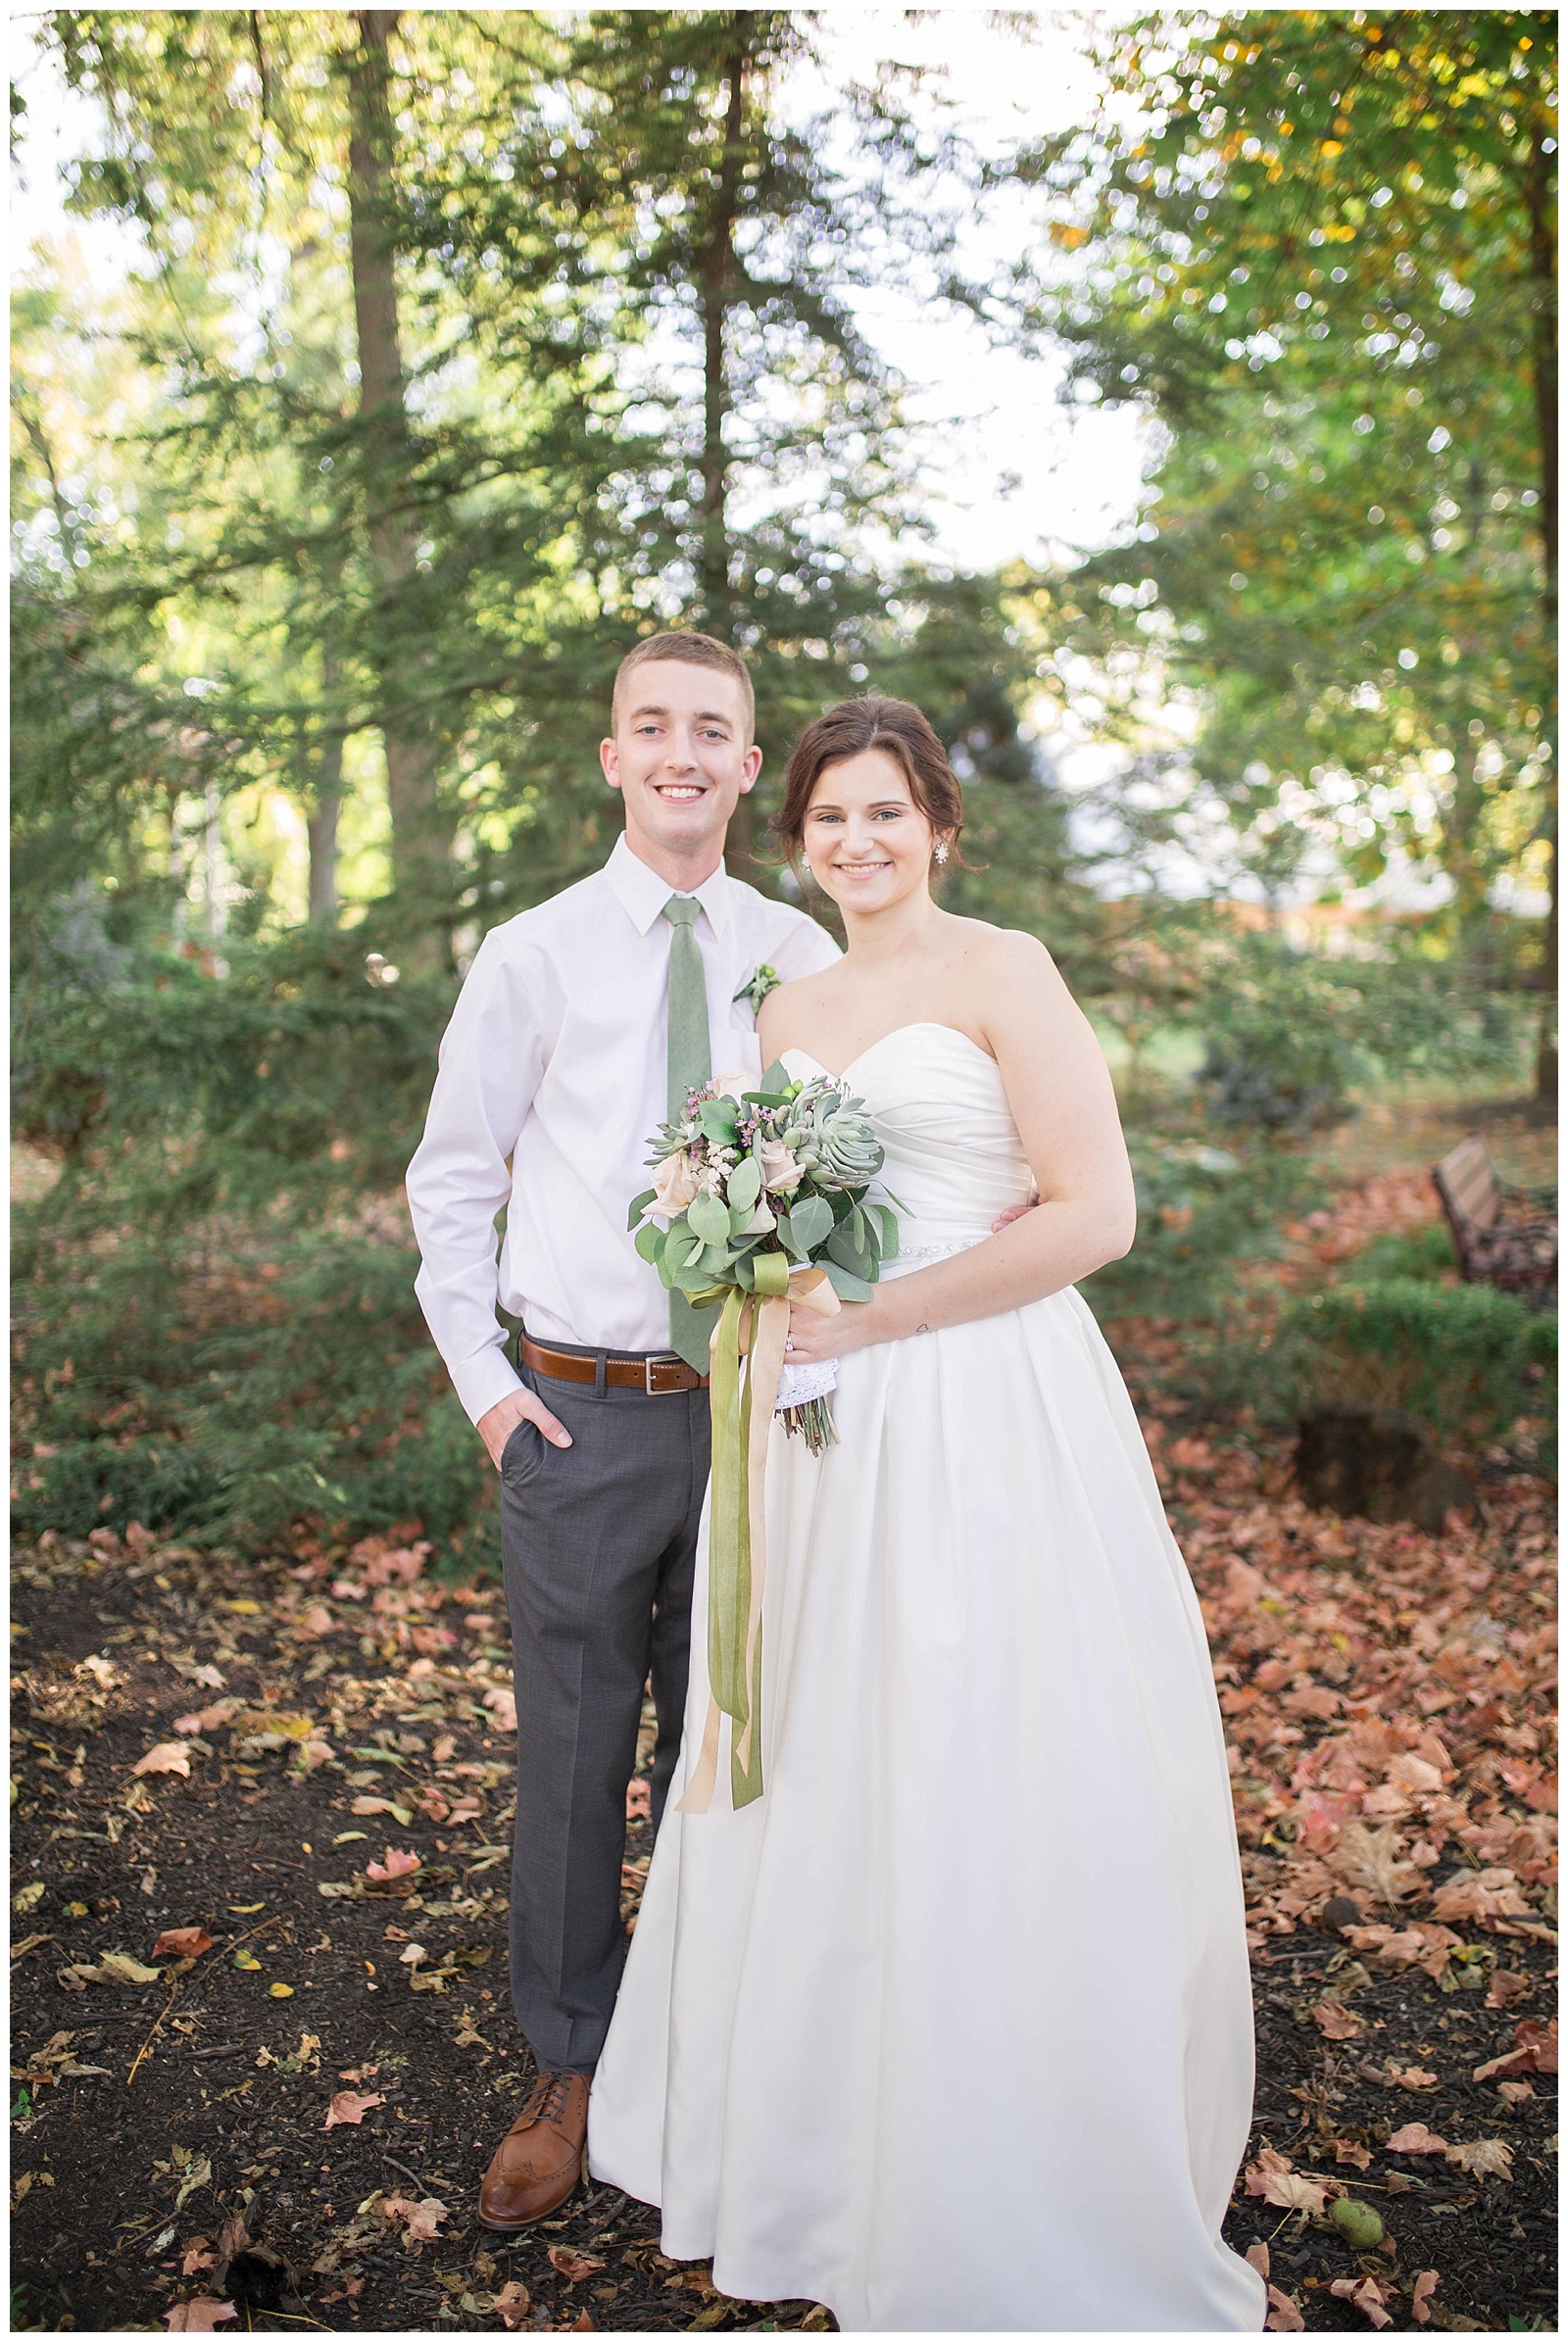 Outdoor Fall Wedding in Ohio | Monica Brown Photography | monicabrownphoto.com